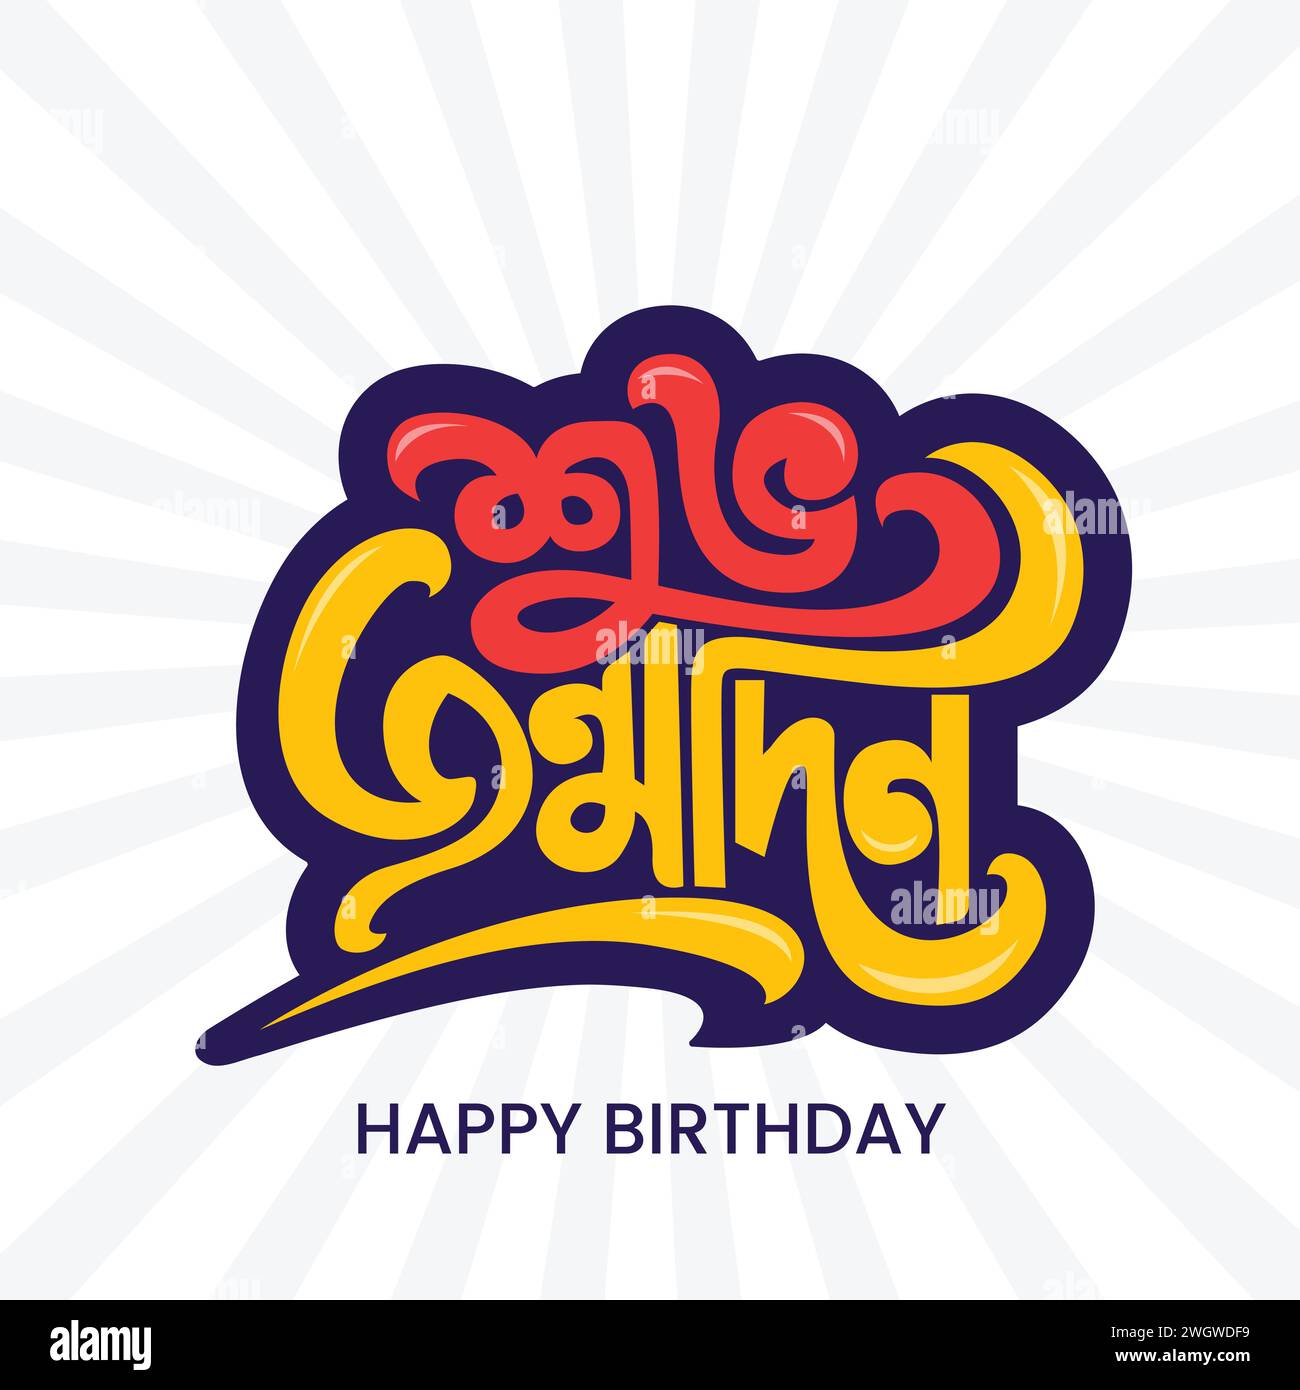 Happy Birthday Bangla Typography and Calligraphy vector illustration. Happy birthday greeting card, banner, poster, wishing template design. Stock Vector